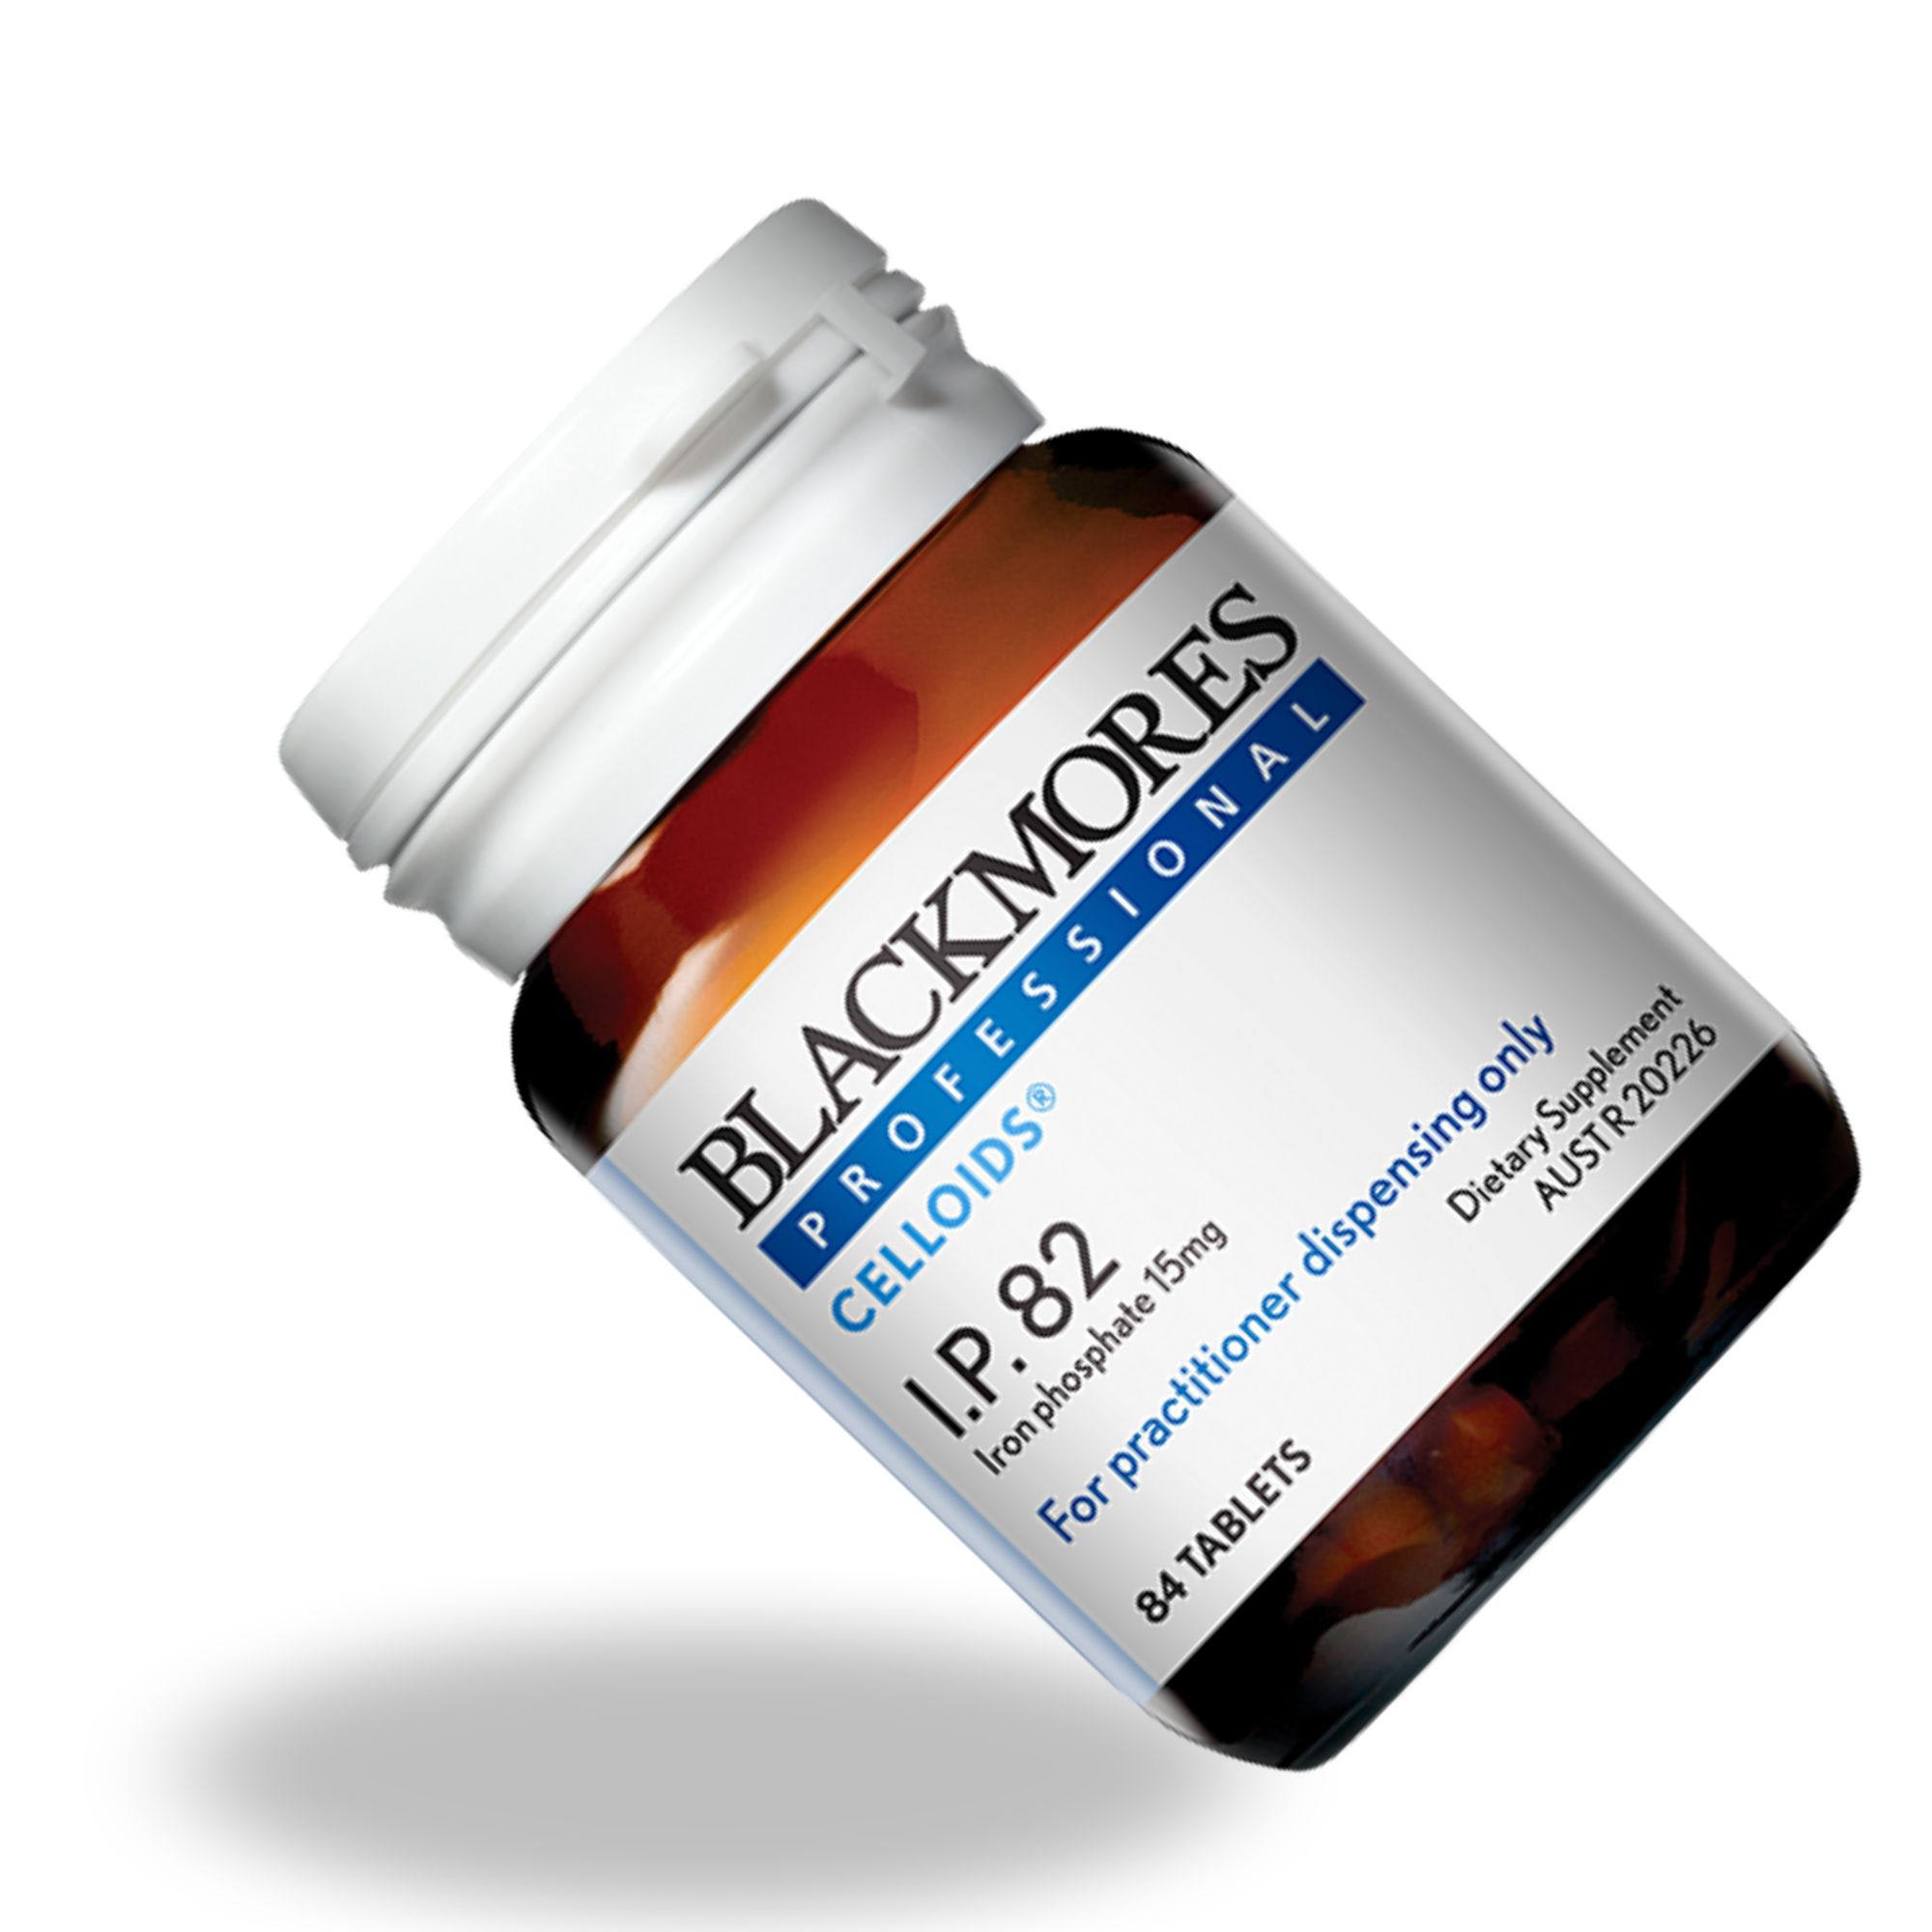 Blackmore Professional I.P.82 Celloids 84 Tablets